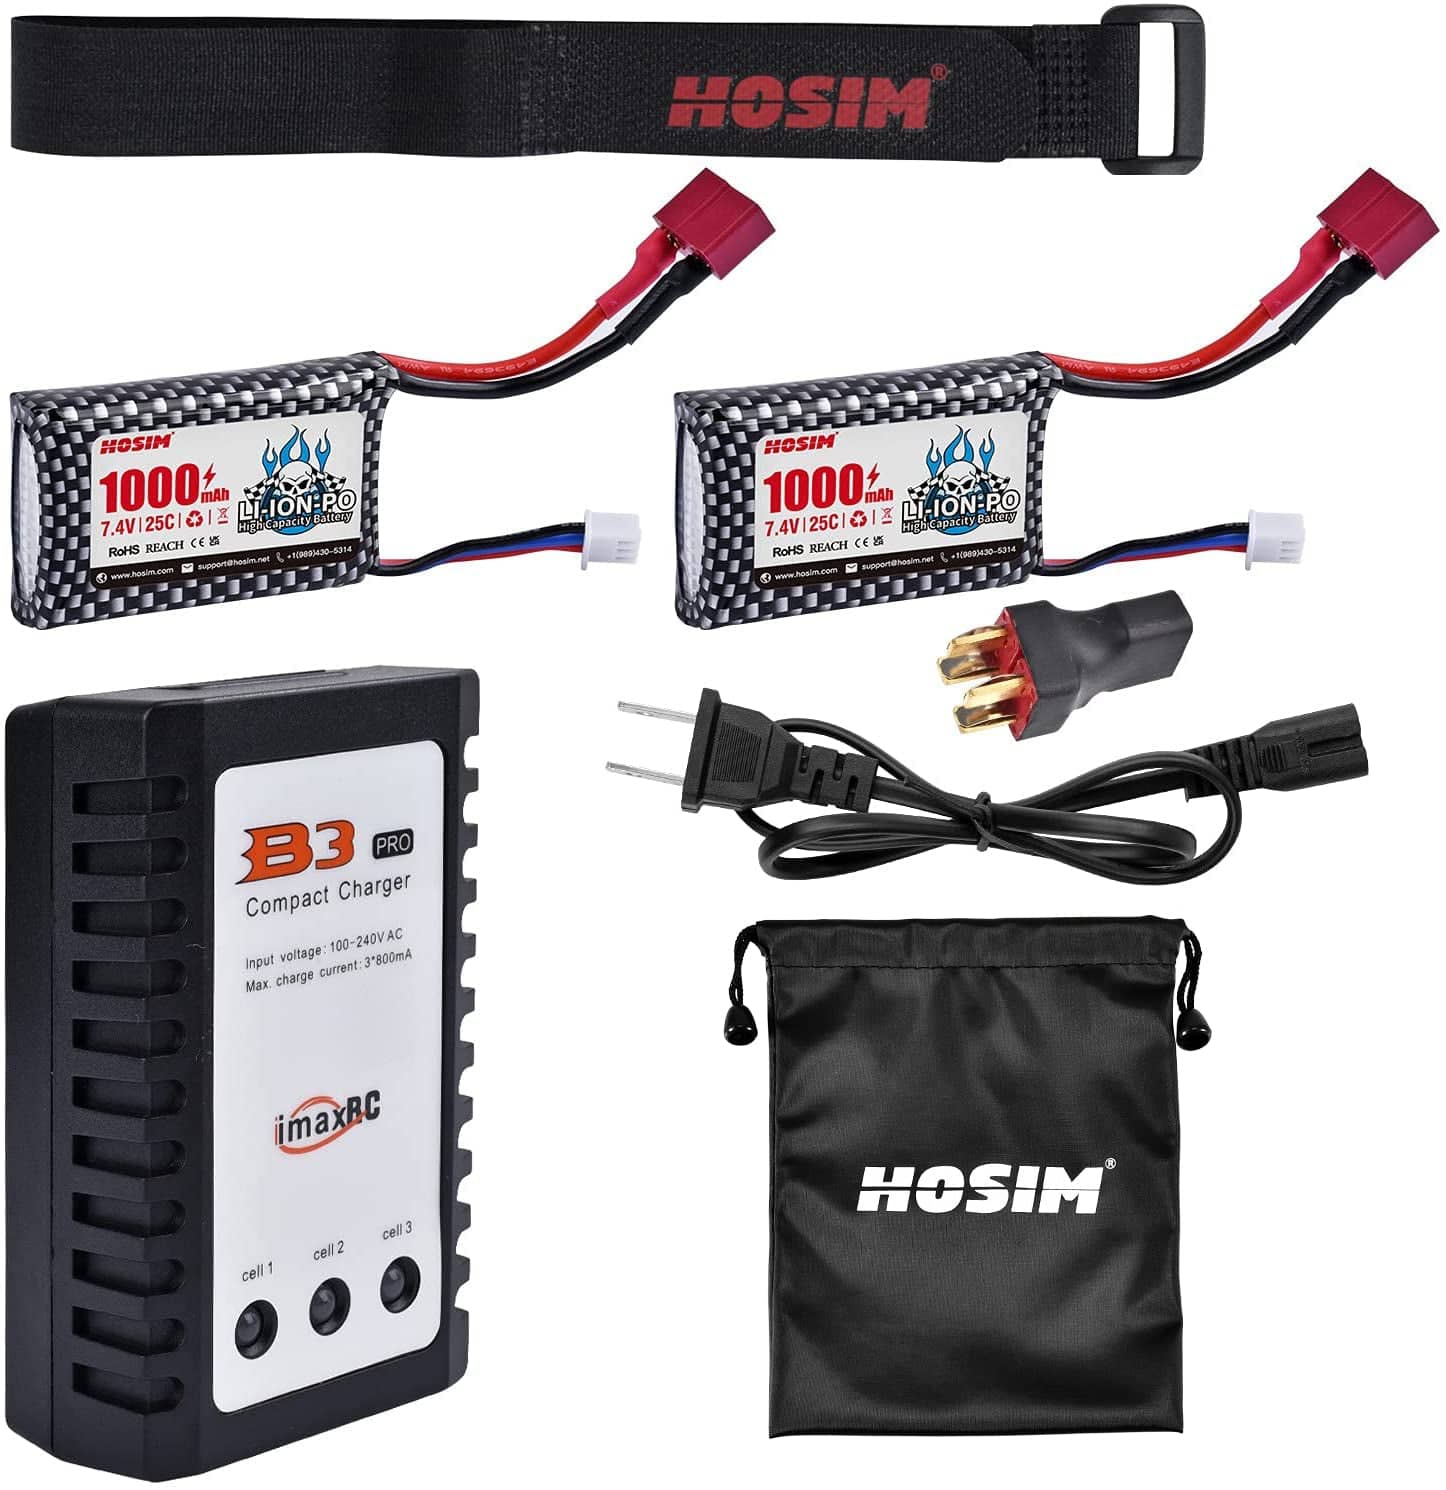 Hosim 2pcs 7.4V 1000mAh 25C T Connector Li-ion Battery Pack with 1 Balance Charger,1 Battery Bag, 1 Double battery connector & 1 Strap for 901 903 905 RC Cars